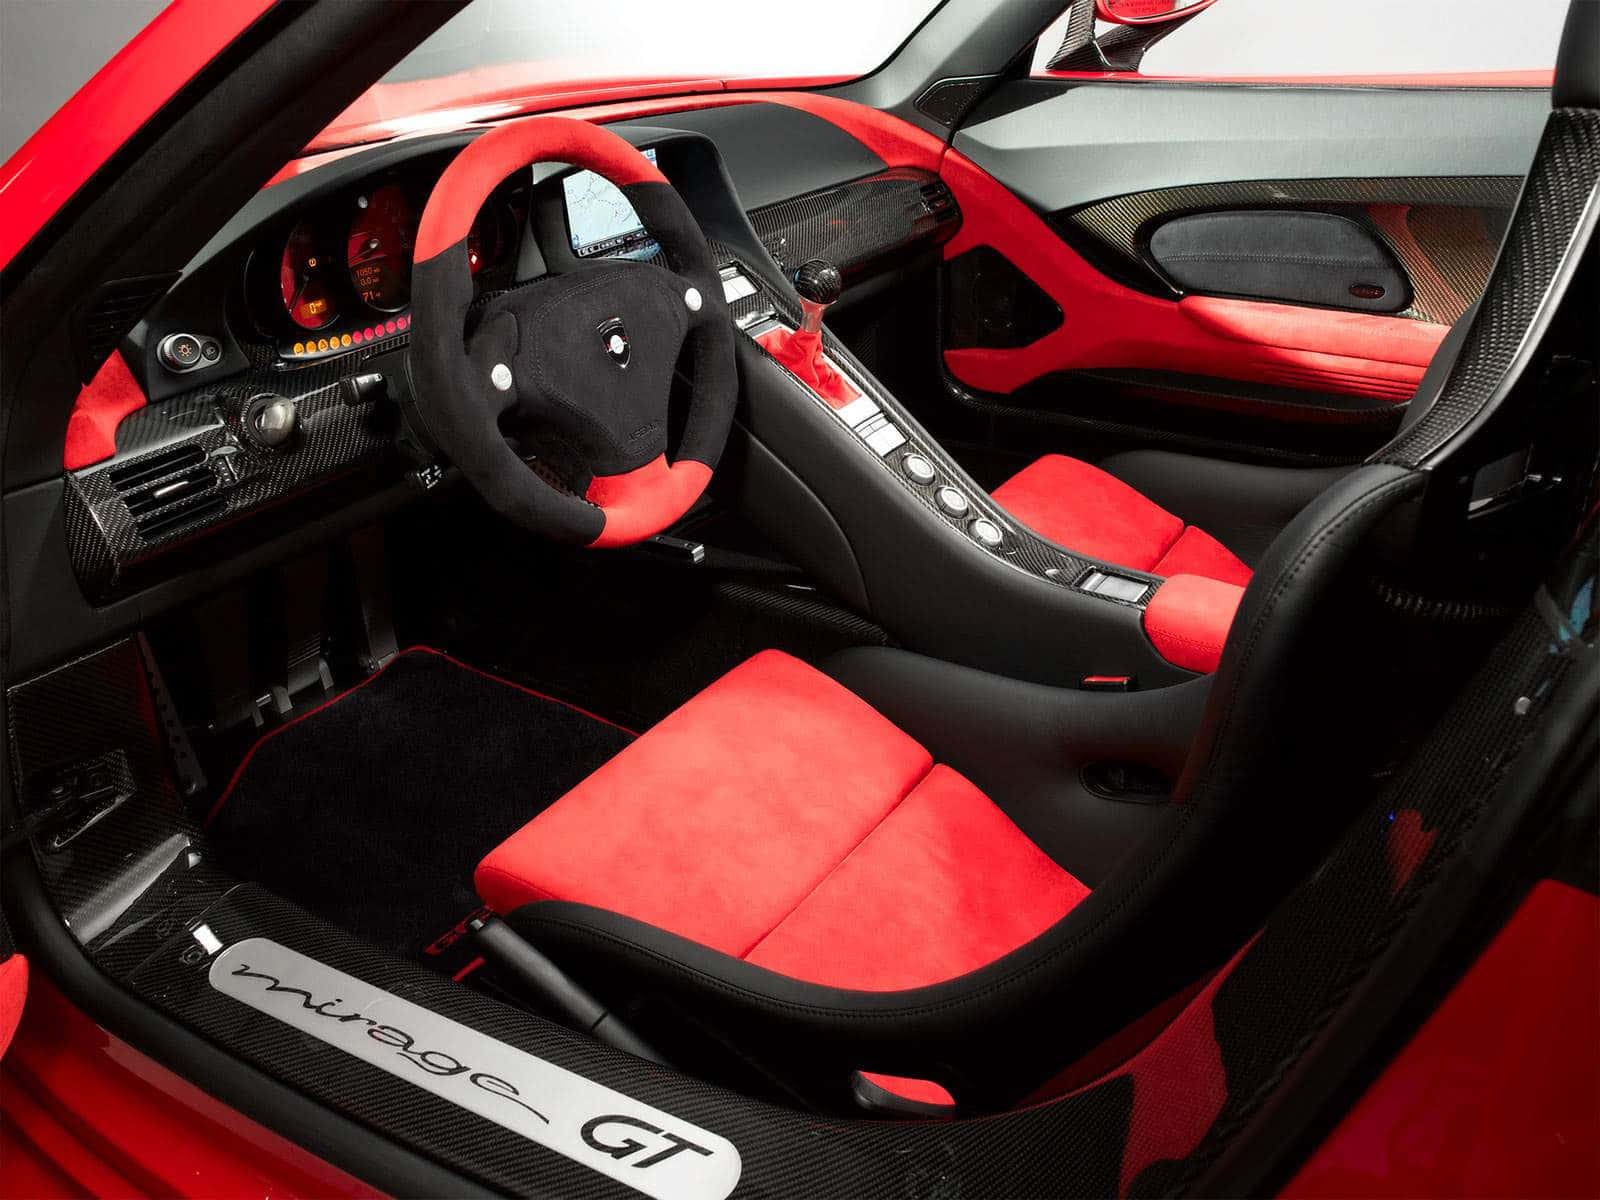 Enjoy a comfortable ride in the interior of this luxurious car